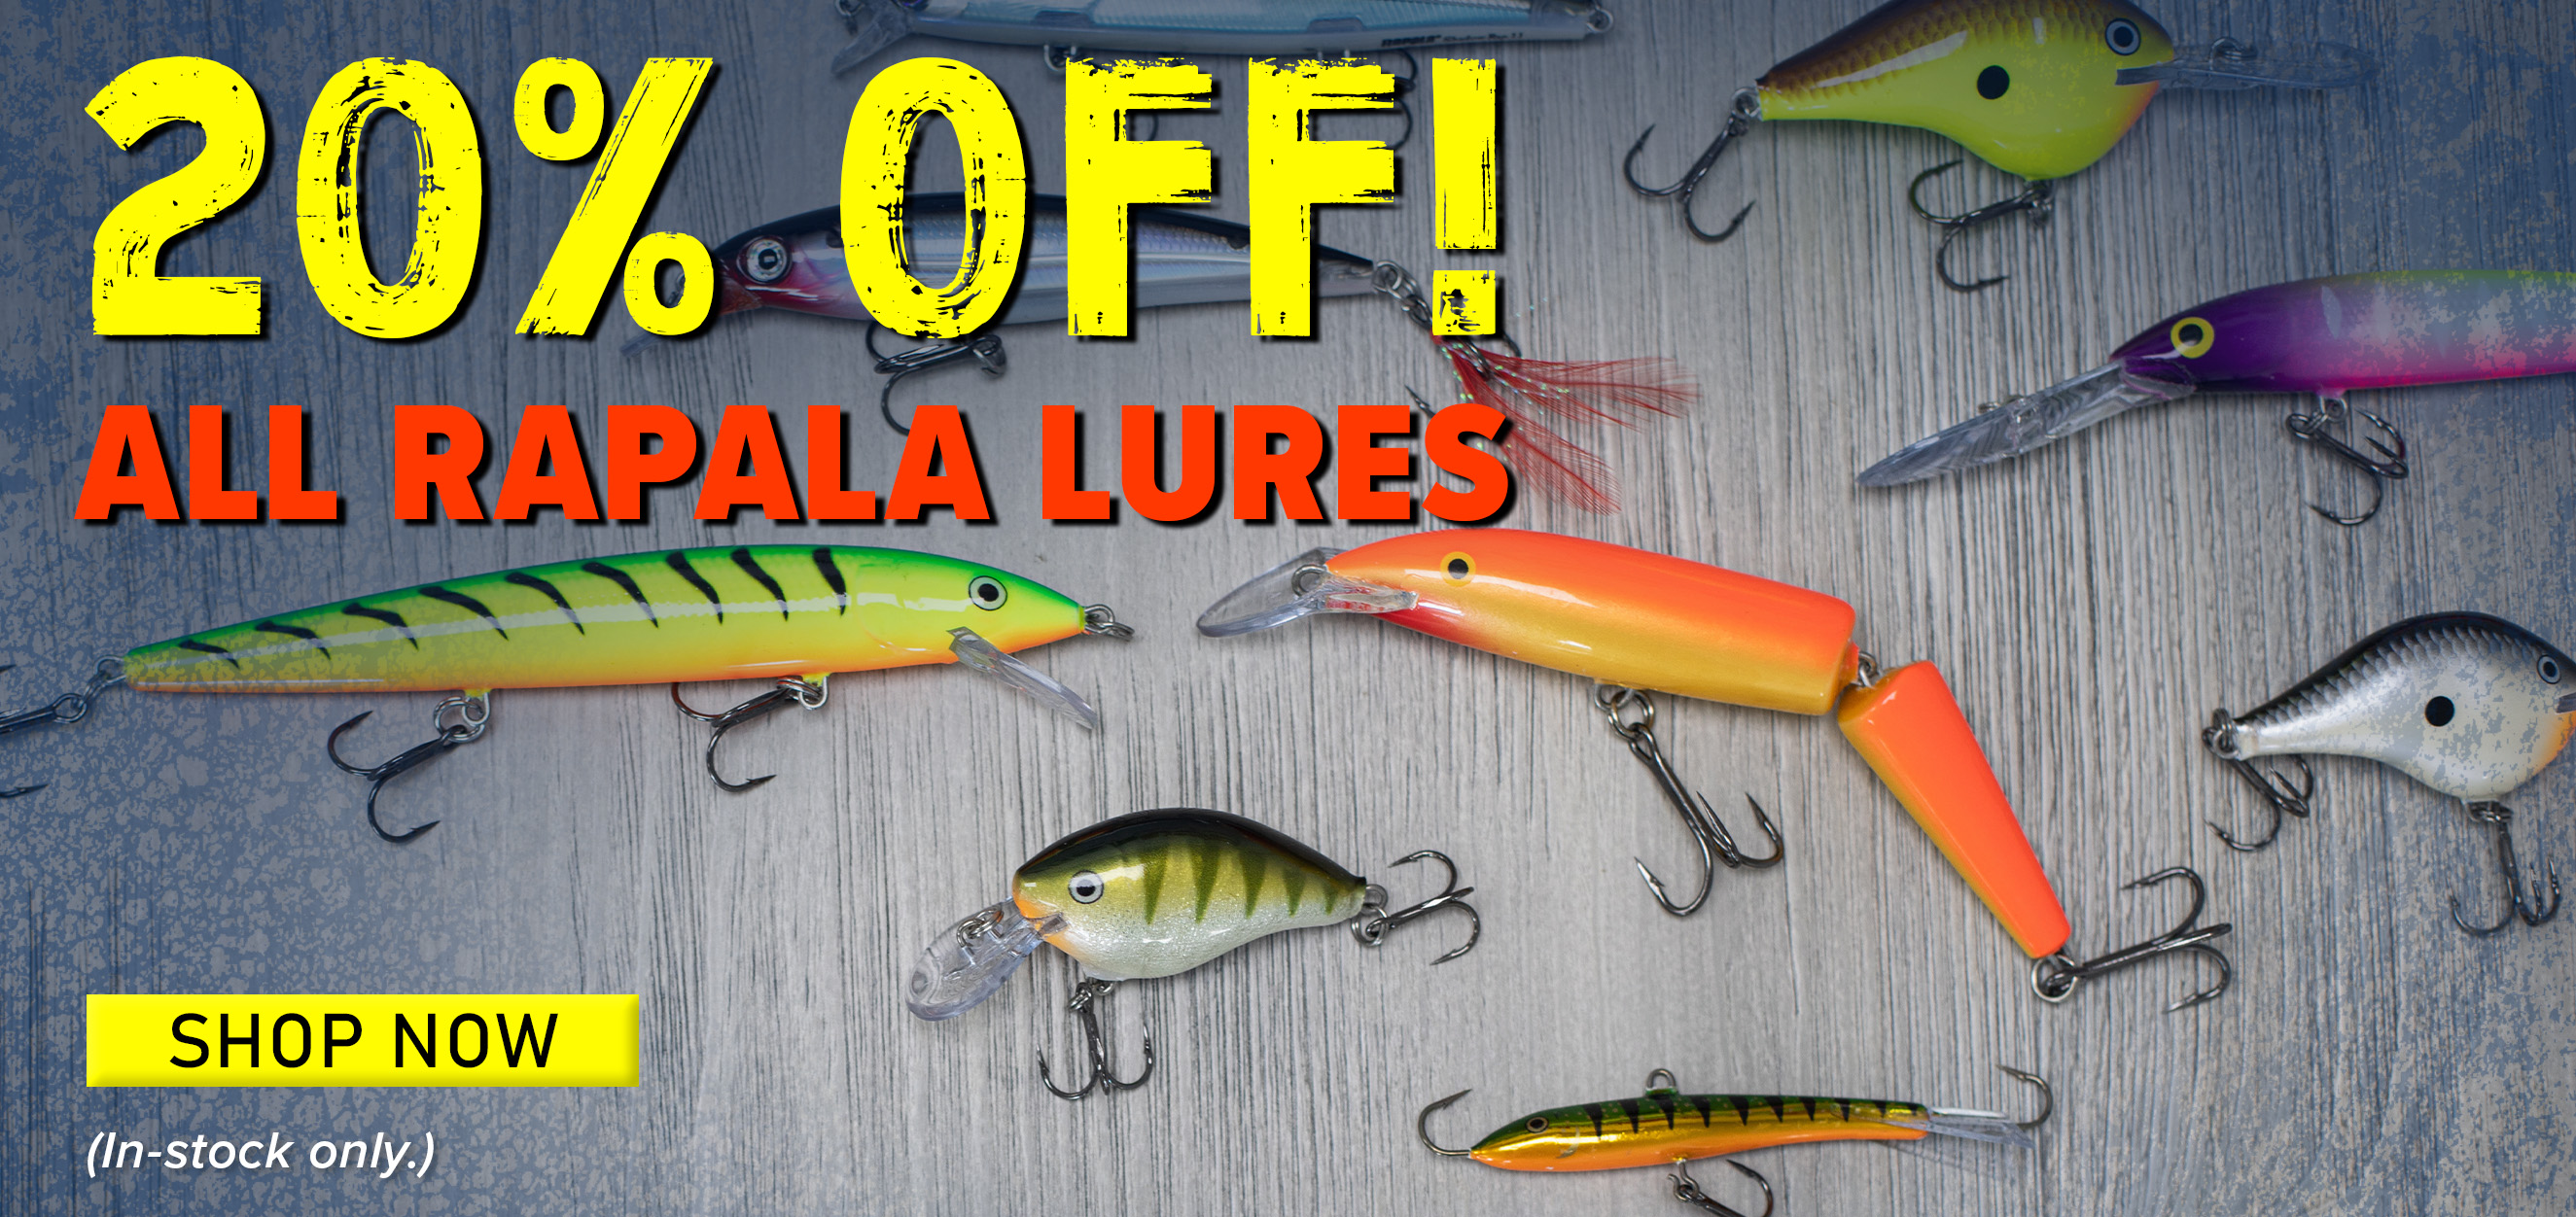 Customer Appreciation Week Starts NOW! 20% Off All Rapala Lures